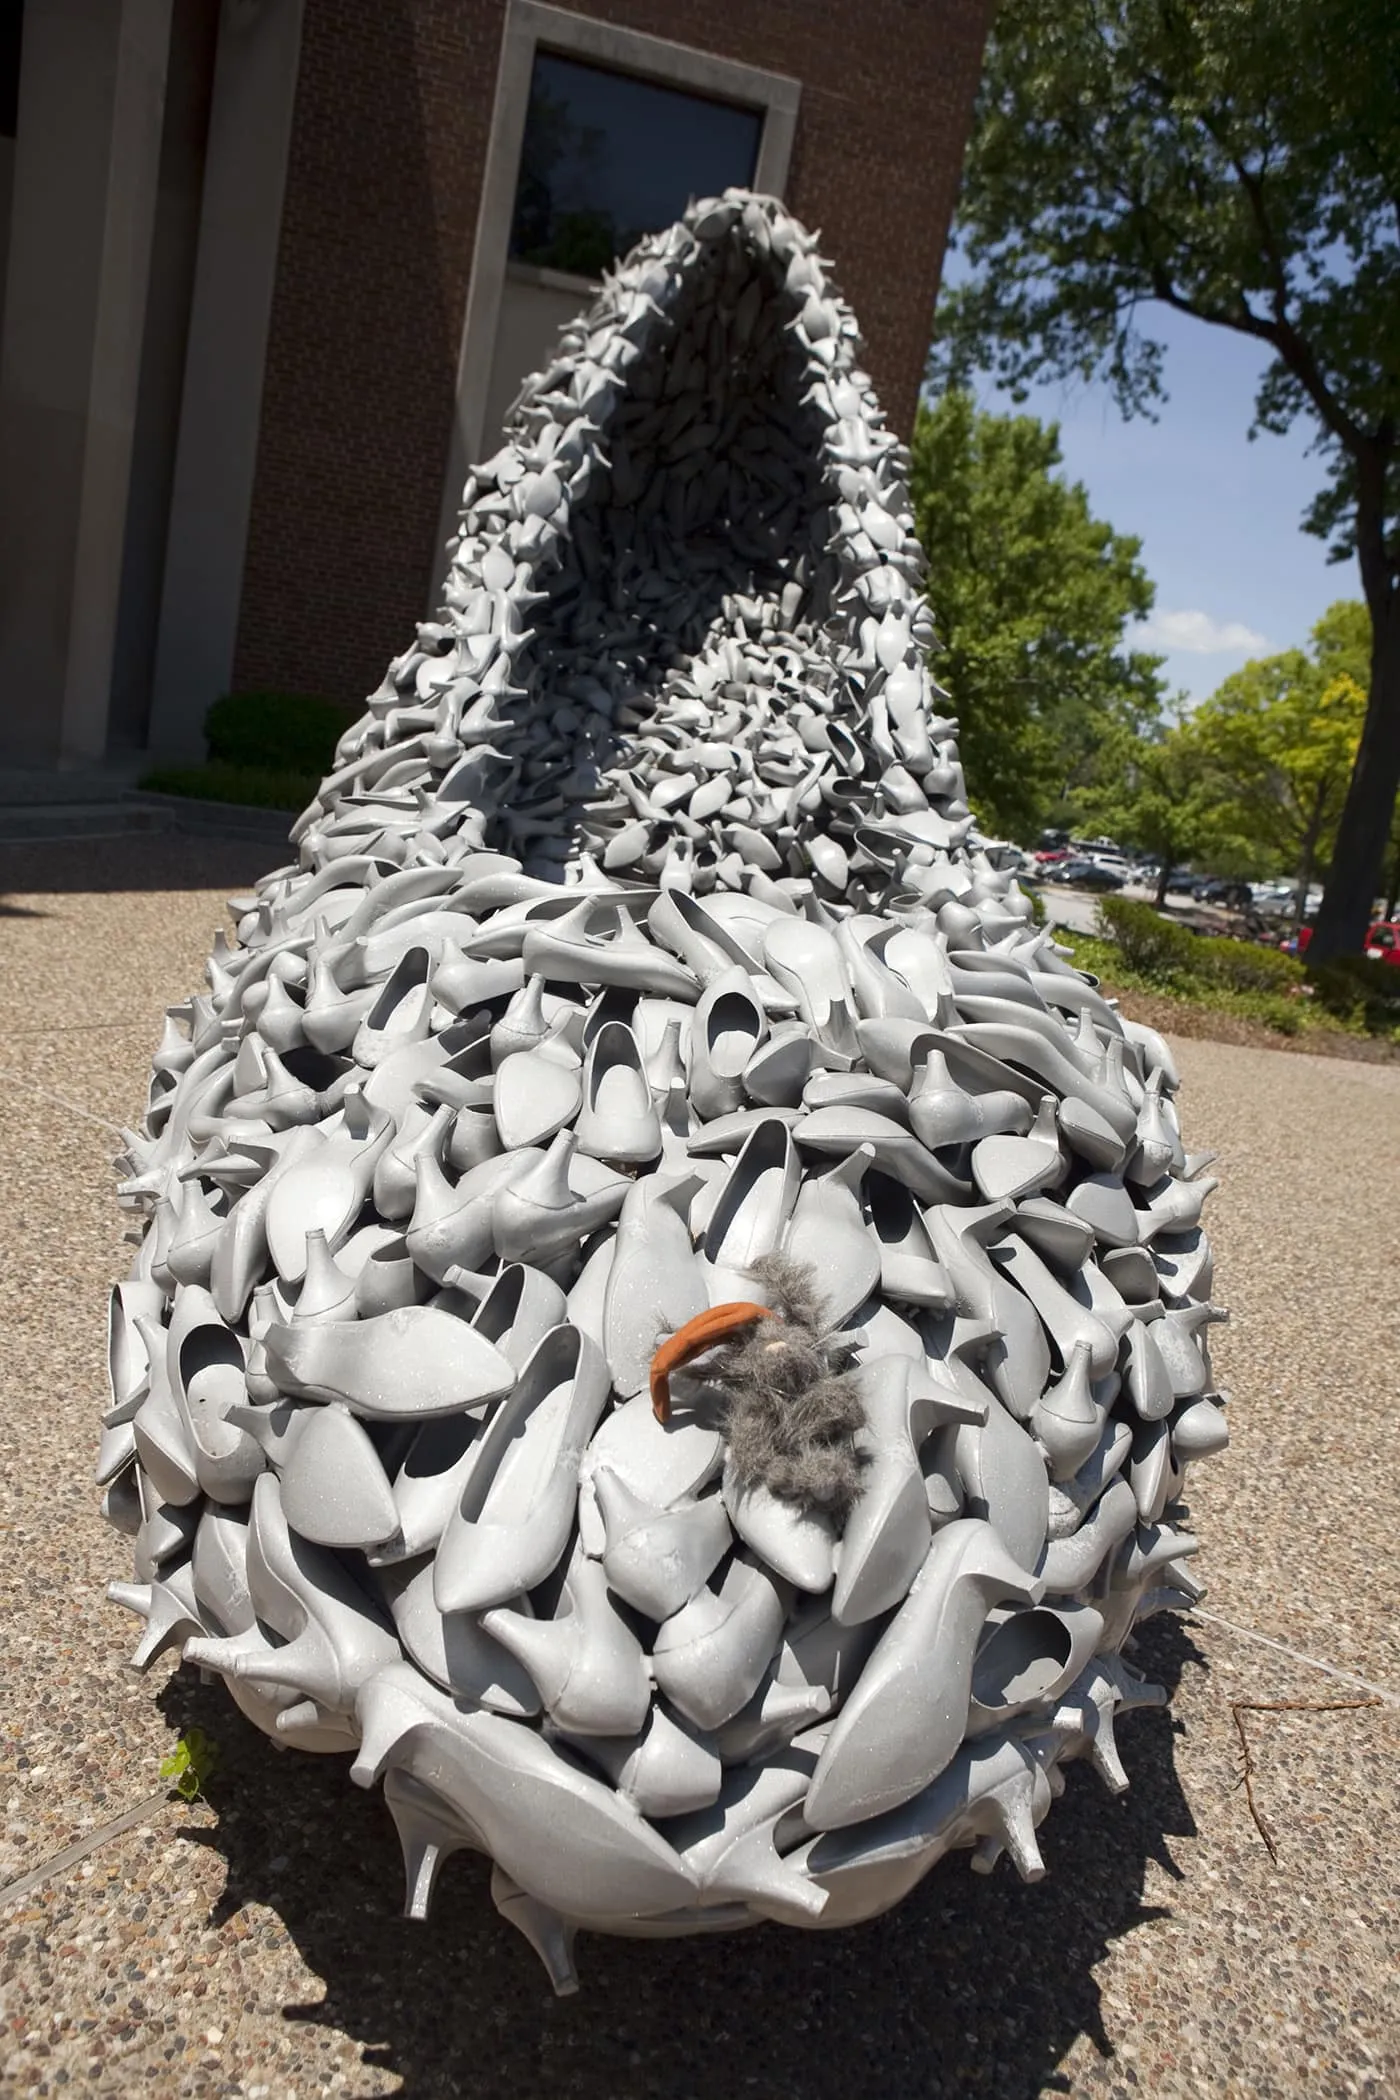 Big Shoe Made of Shoes in Clayton, Missouri